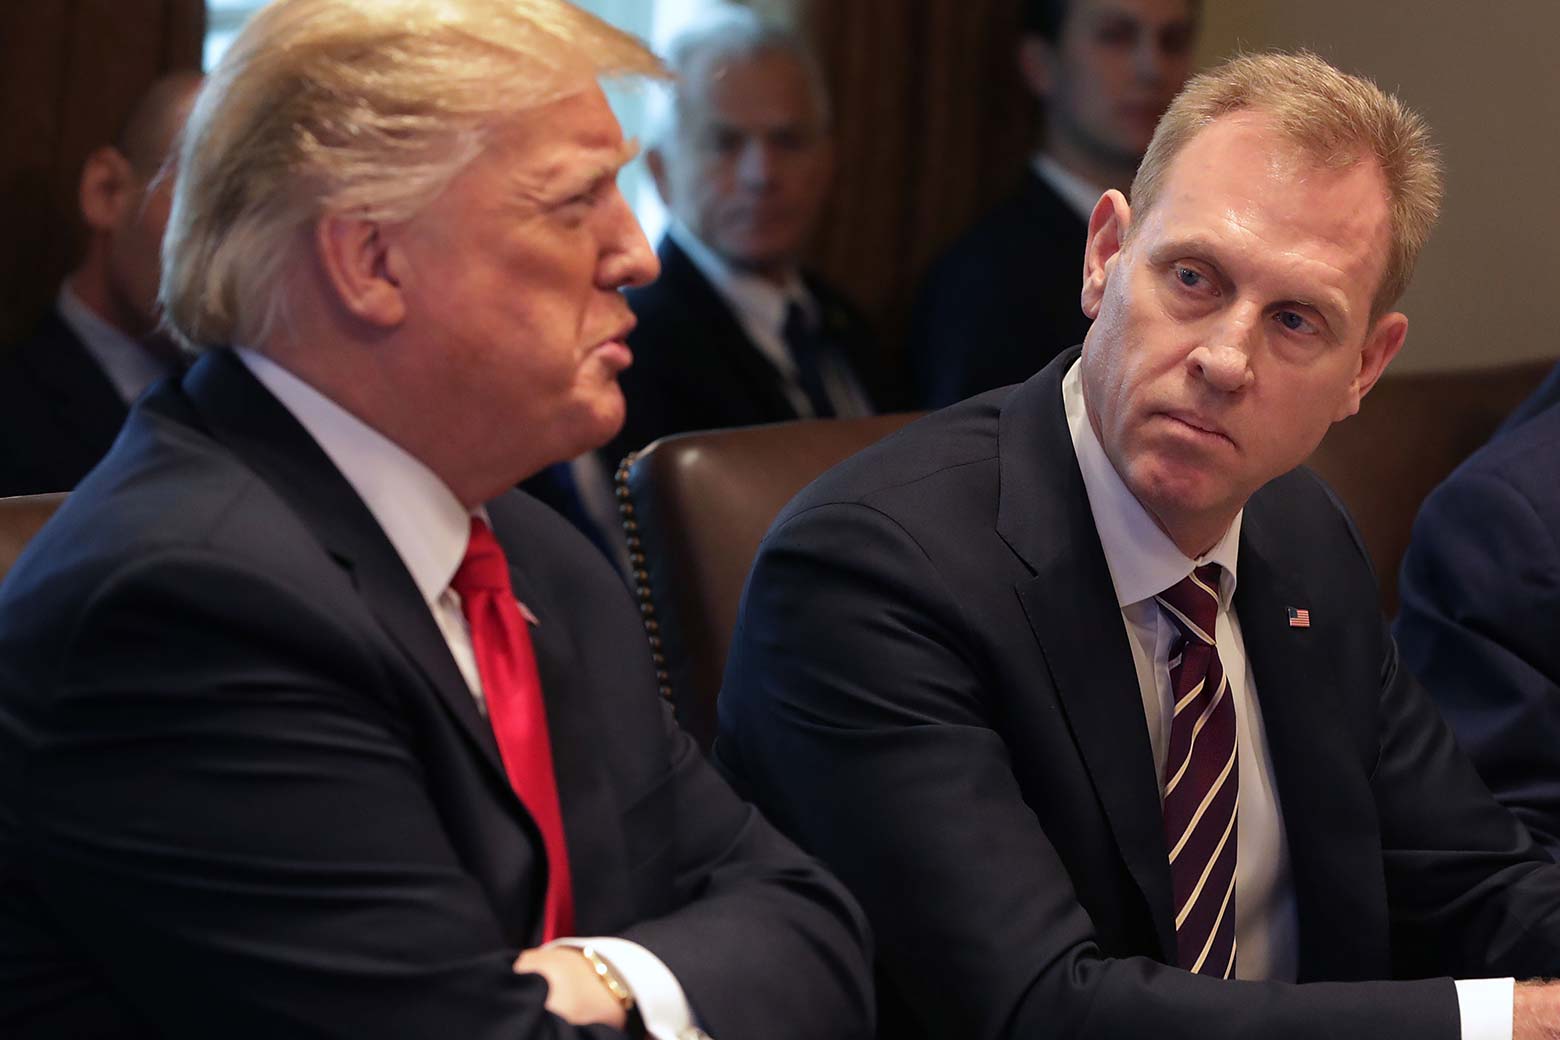 U.S. President Donald Trump and acting Defense Secretary Patrick Shanahan speak during a meeting at the White House on Jan. 2.